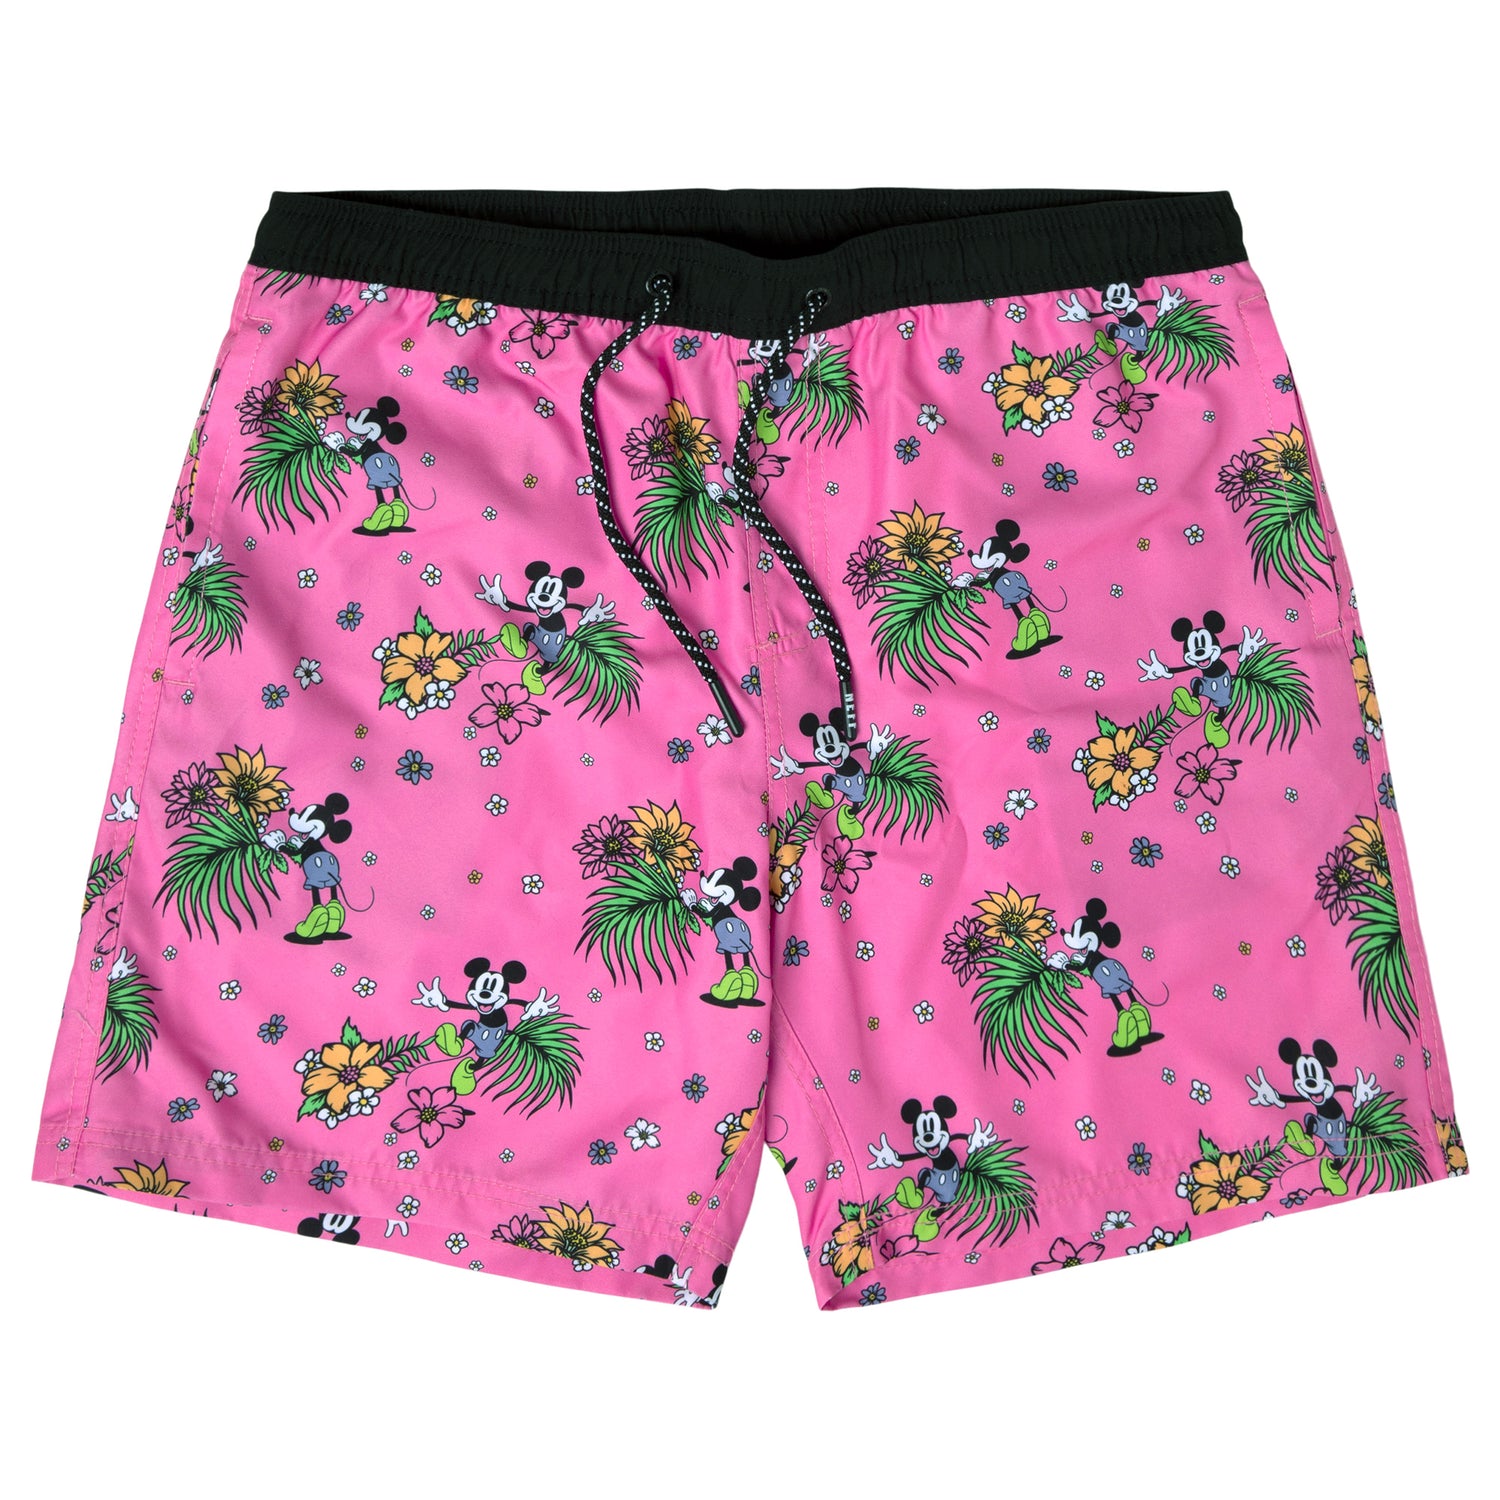 MICKEY MOUSE STANDING PALM 17" HOT TUB VOLLEY SHORTS - PINK